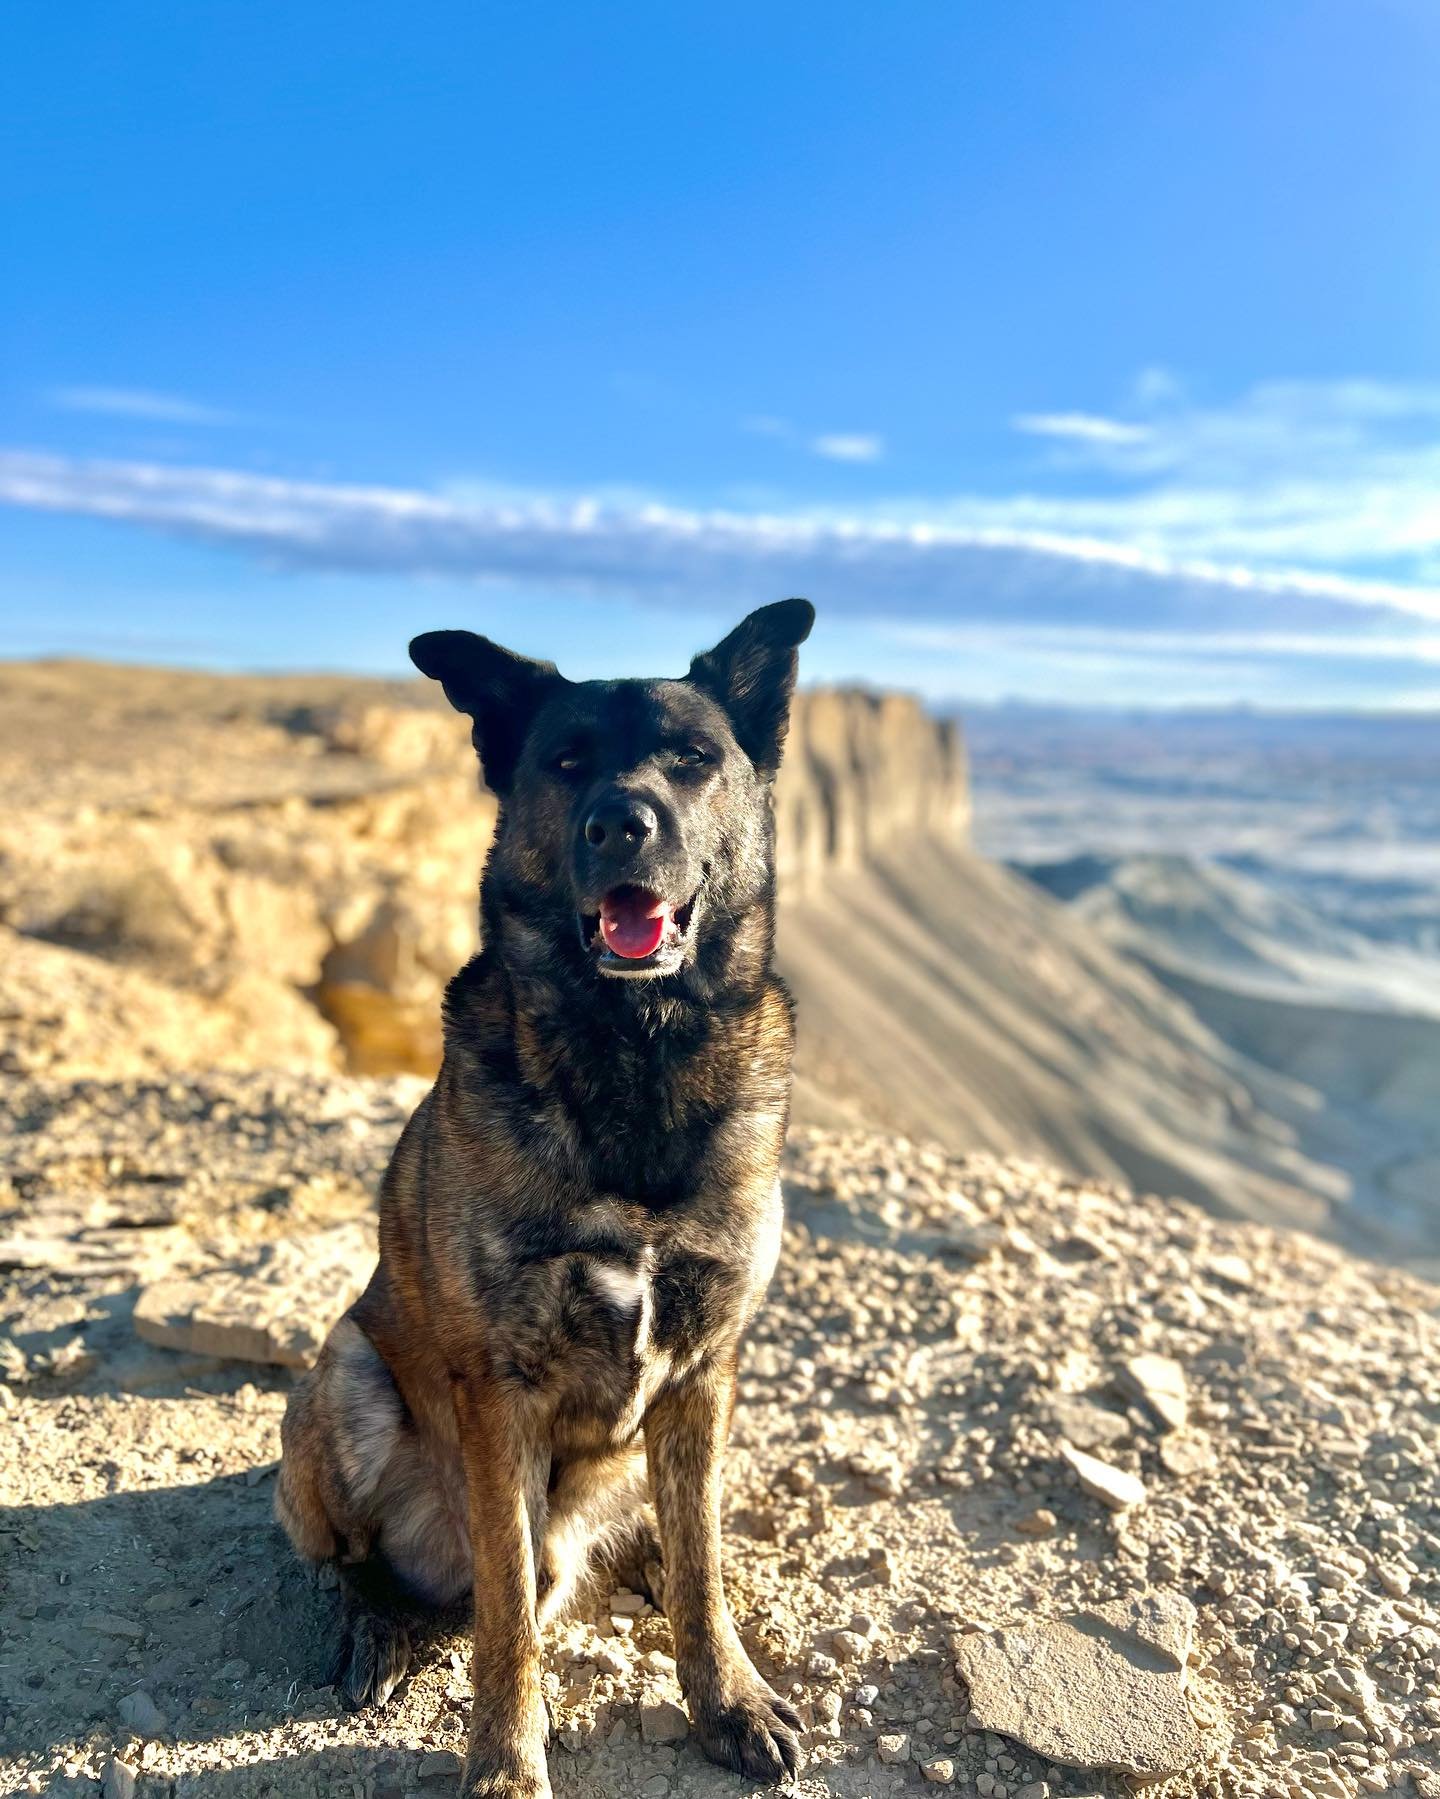 seeing amazing places &lt; seeing amazing places with your DOG

Kenai has now been to 
- Moonscape Overlook
- Temple of the Sun and Moon
- Goblin Valley State Park
- Bentonite Hills
- Long Dong Spire

Have you been to these spots yet? Which one are y